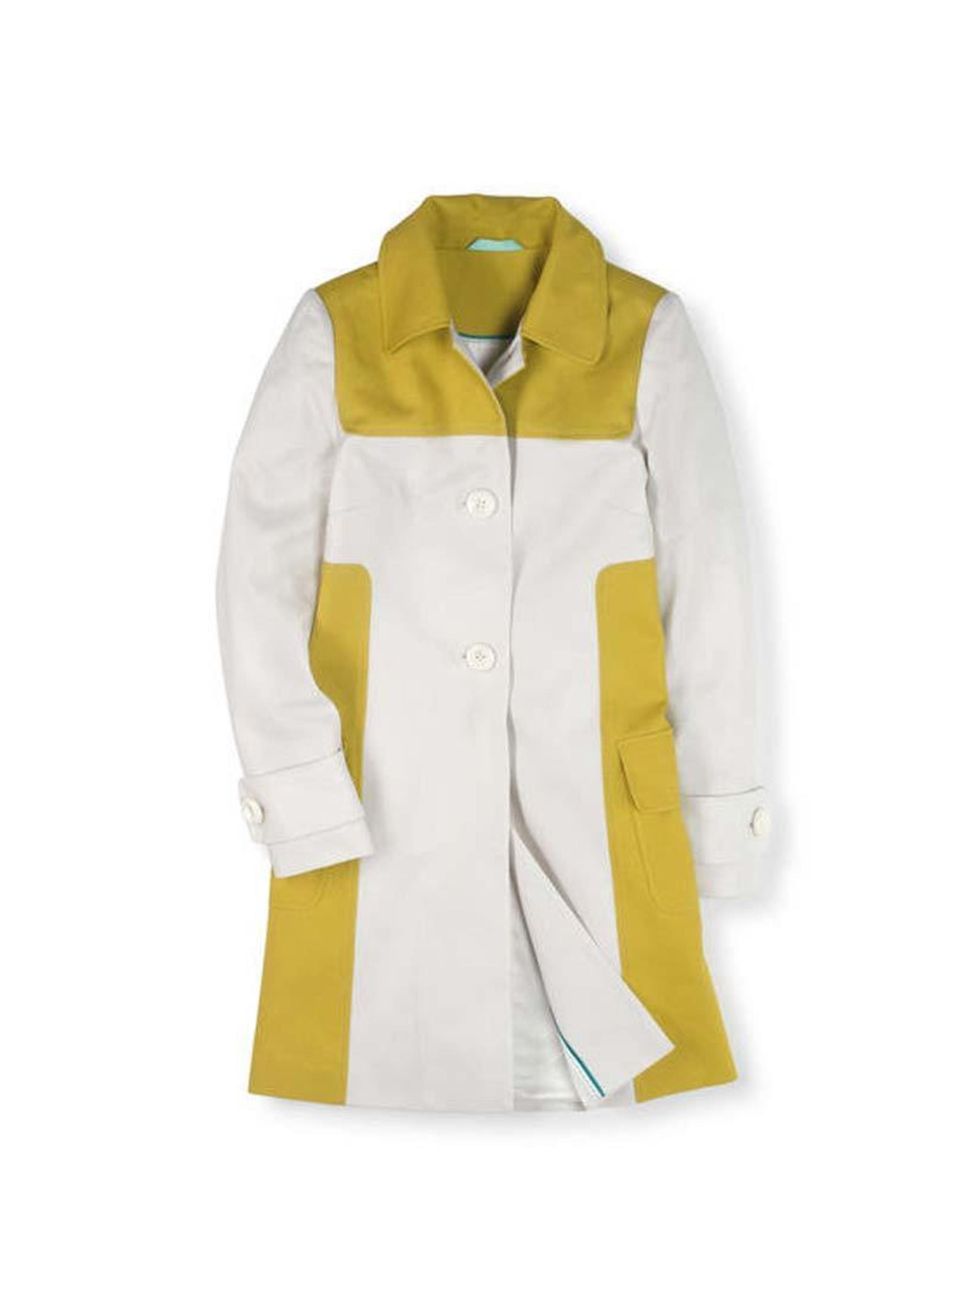 <p>A great spring coat will revive your overworked winter wardrobe.</p>

<p><a href="http://www.boden.co.uk/en-GB/Womens-Coats-Jackets/Coats/WE477/Womens-Lara-Coat.html" target="_blank">Boden</a> coat, £179</p>